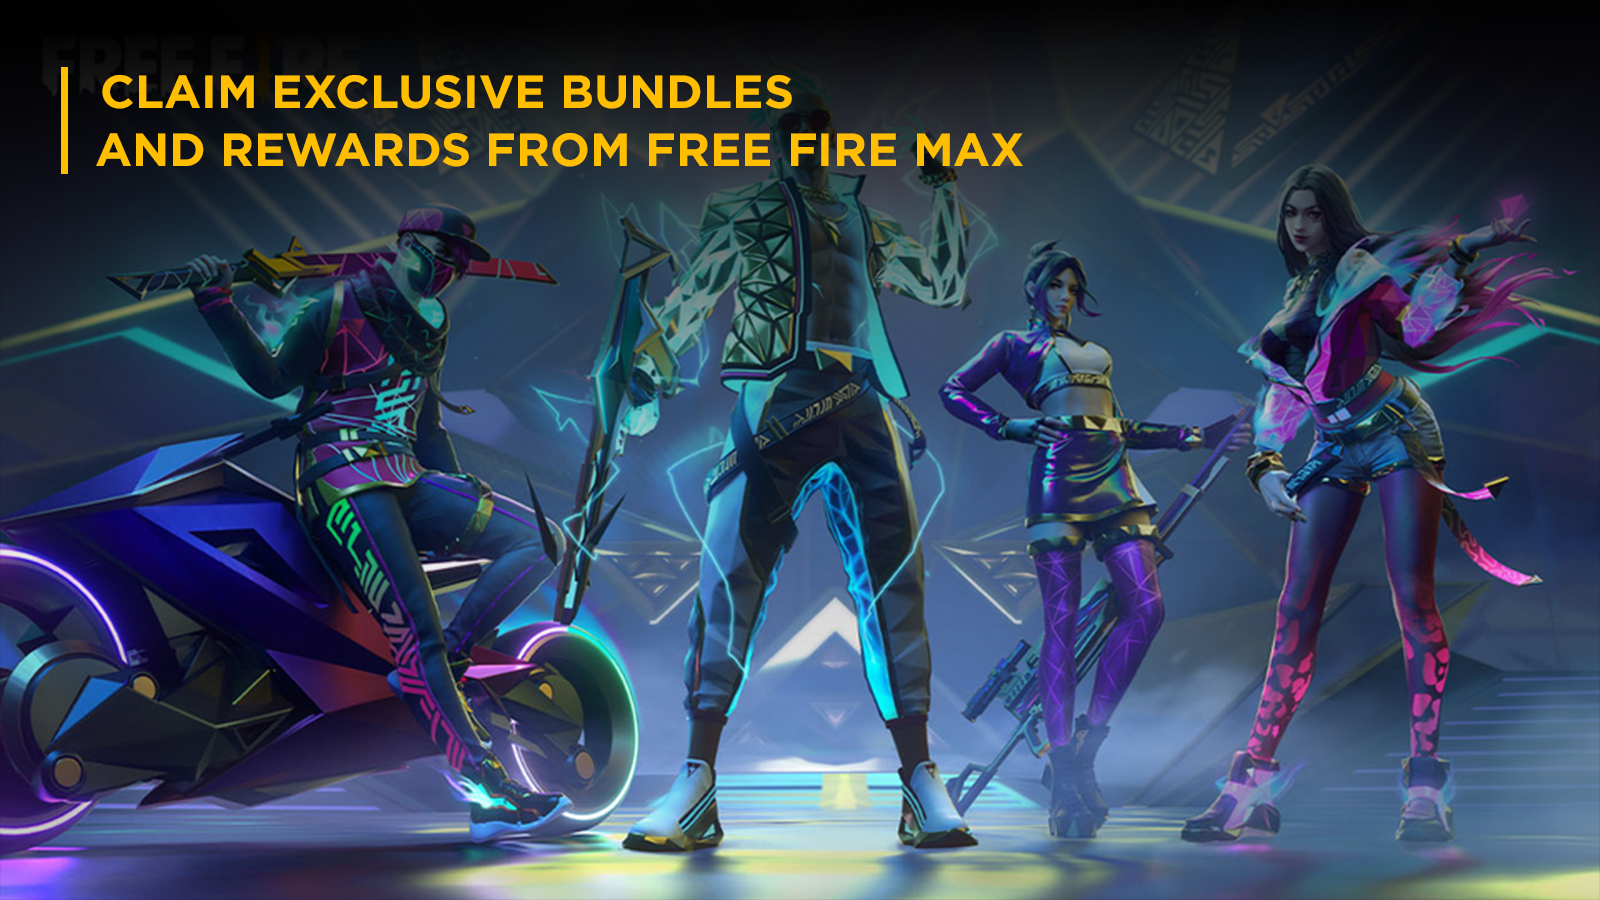 Free Fire MAX: Claim the Seaside Protector Bundle With These Simple Steps